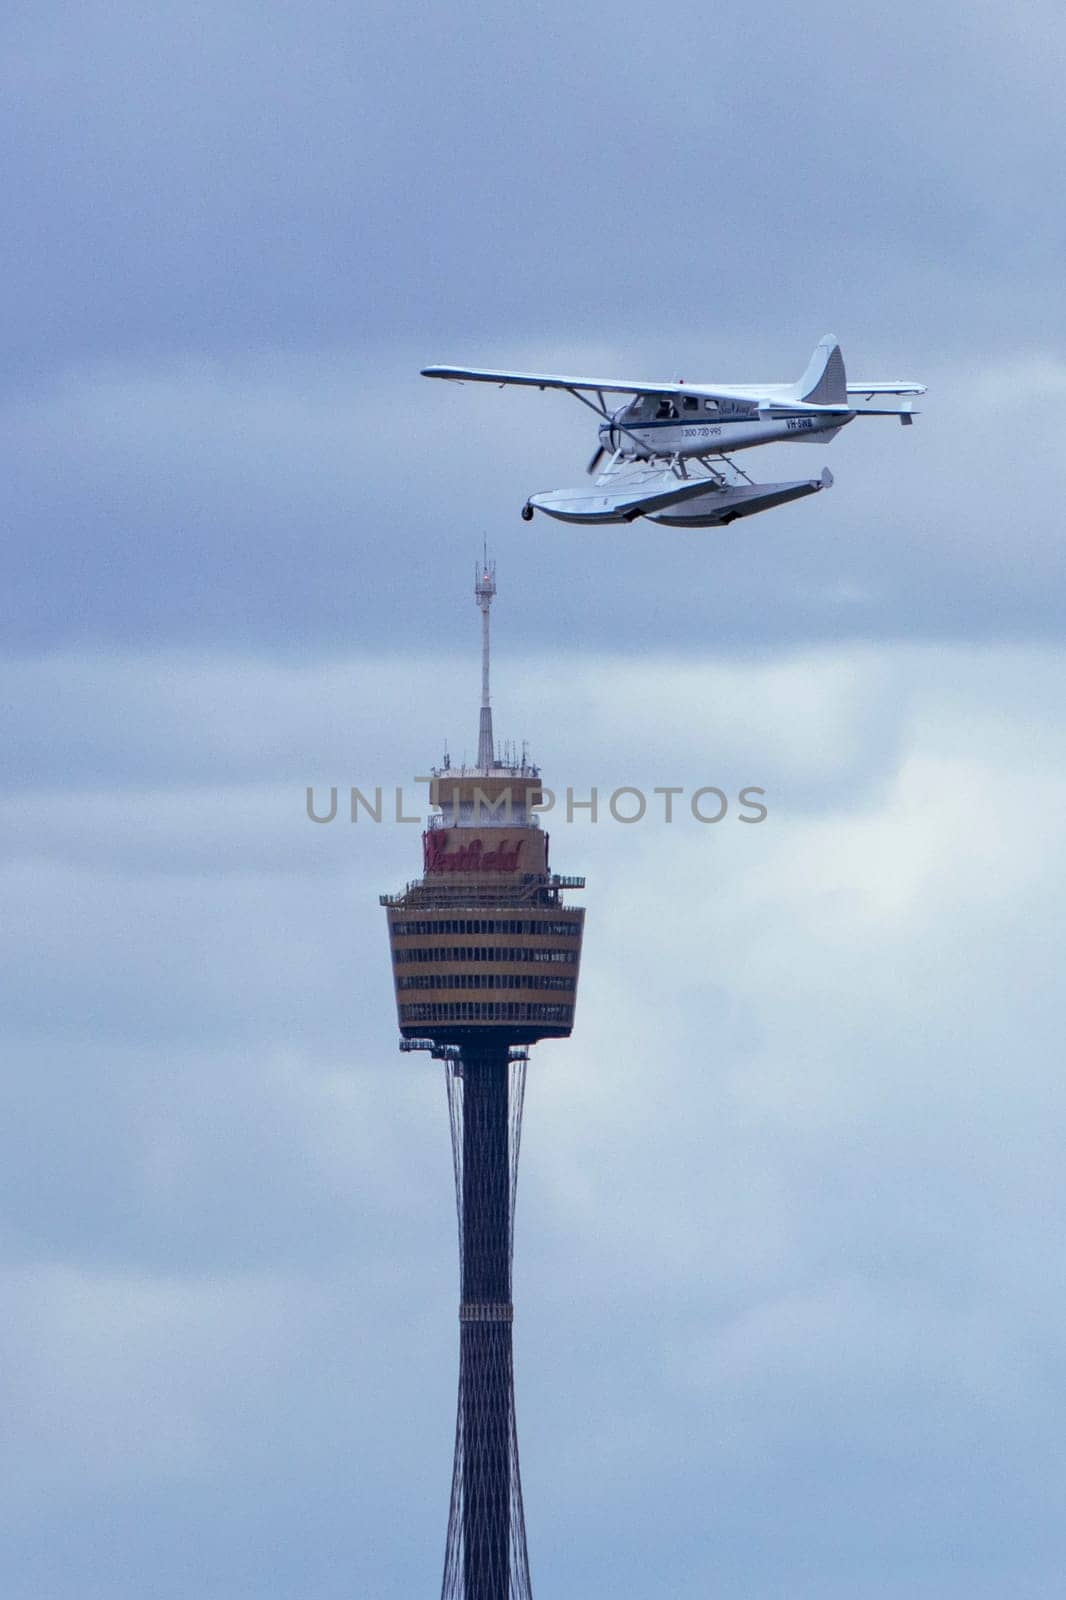 Sydney Seaplane and Westfield Tower - Urban Photography by StefanMal